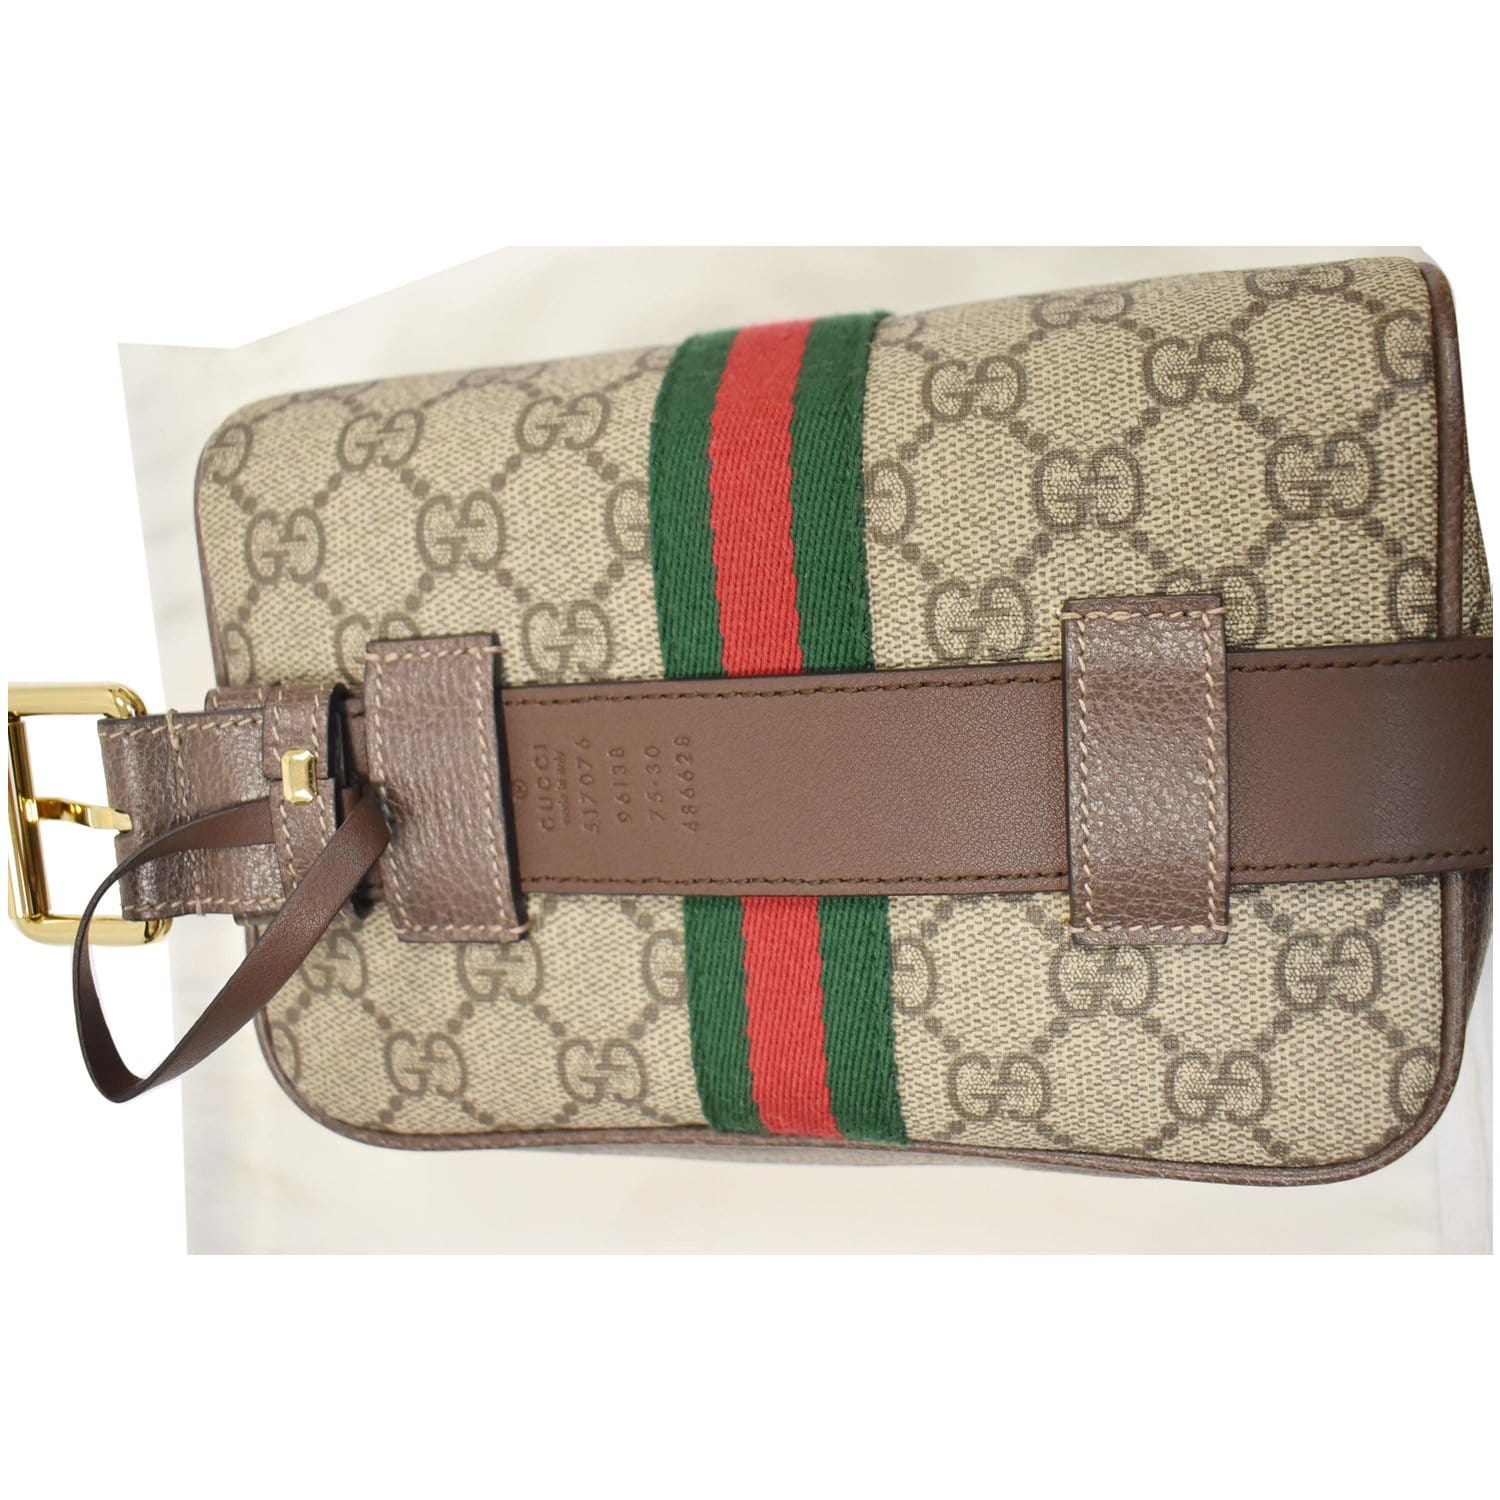 Gucci Beige/Brown GG Canvas and Leather Ophidia Belt Bag Gucci